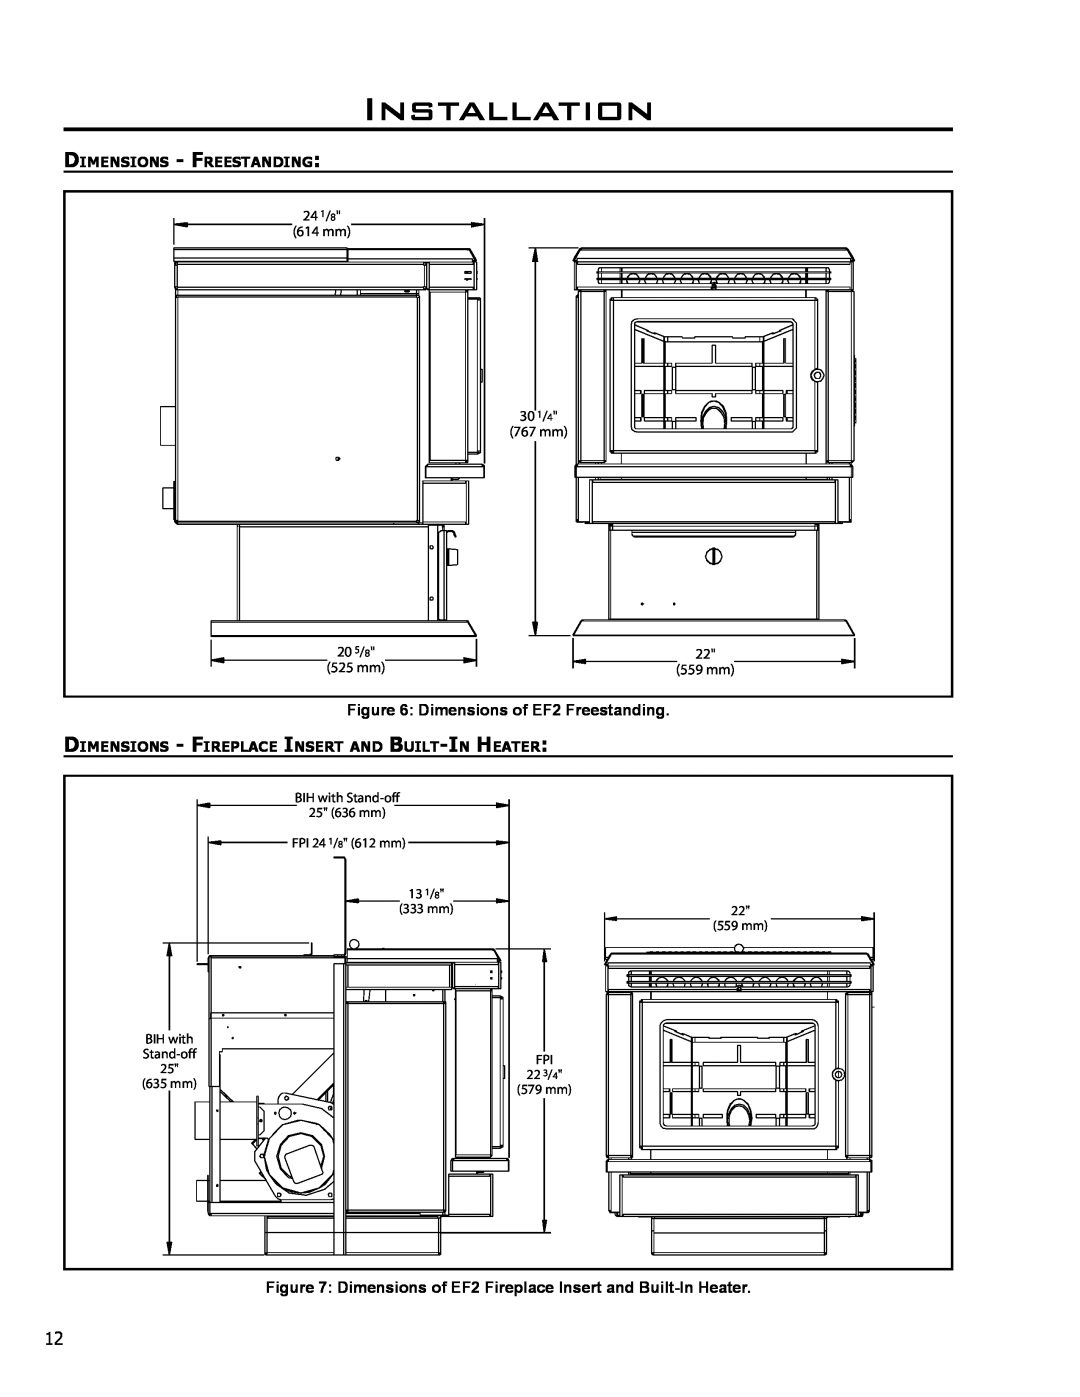 Enviro EF-119 Installation, Dimensions of EF2 Freestanding, Dimensions of EF2 Fireplace Insert and Built-In Heater 